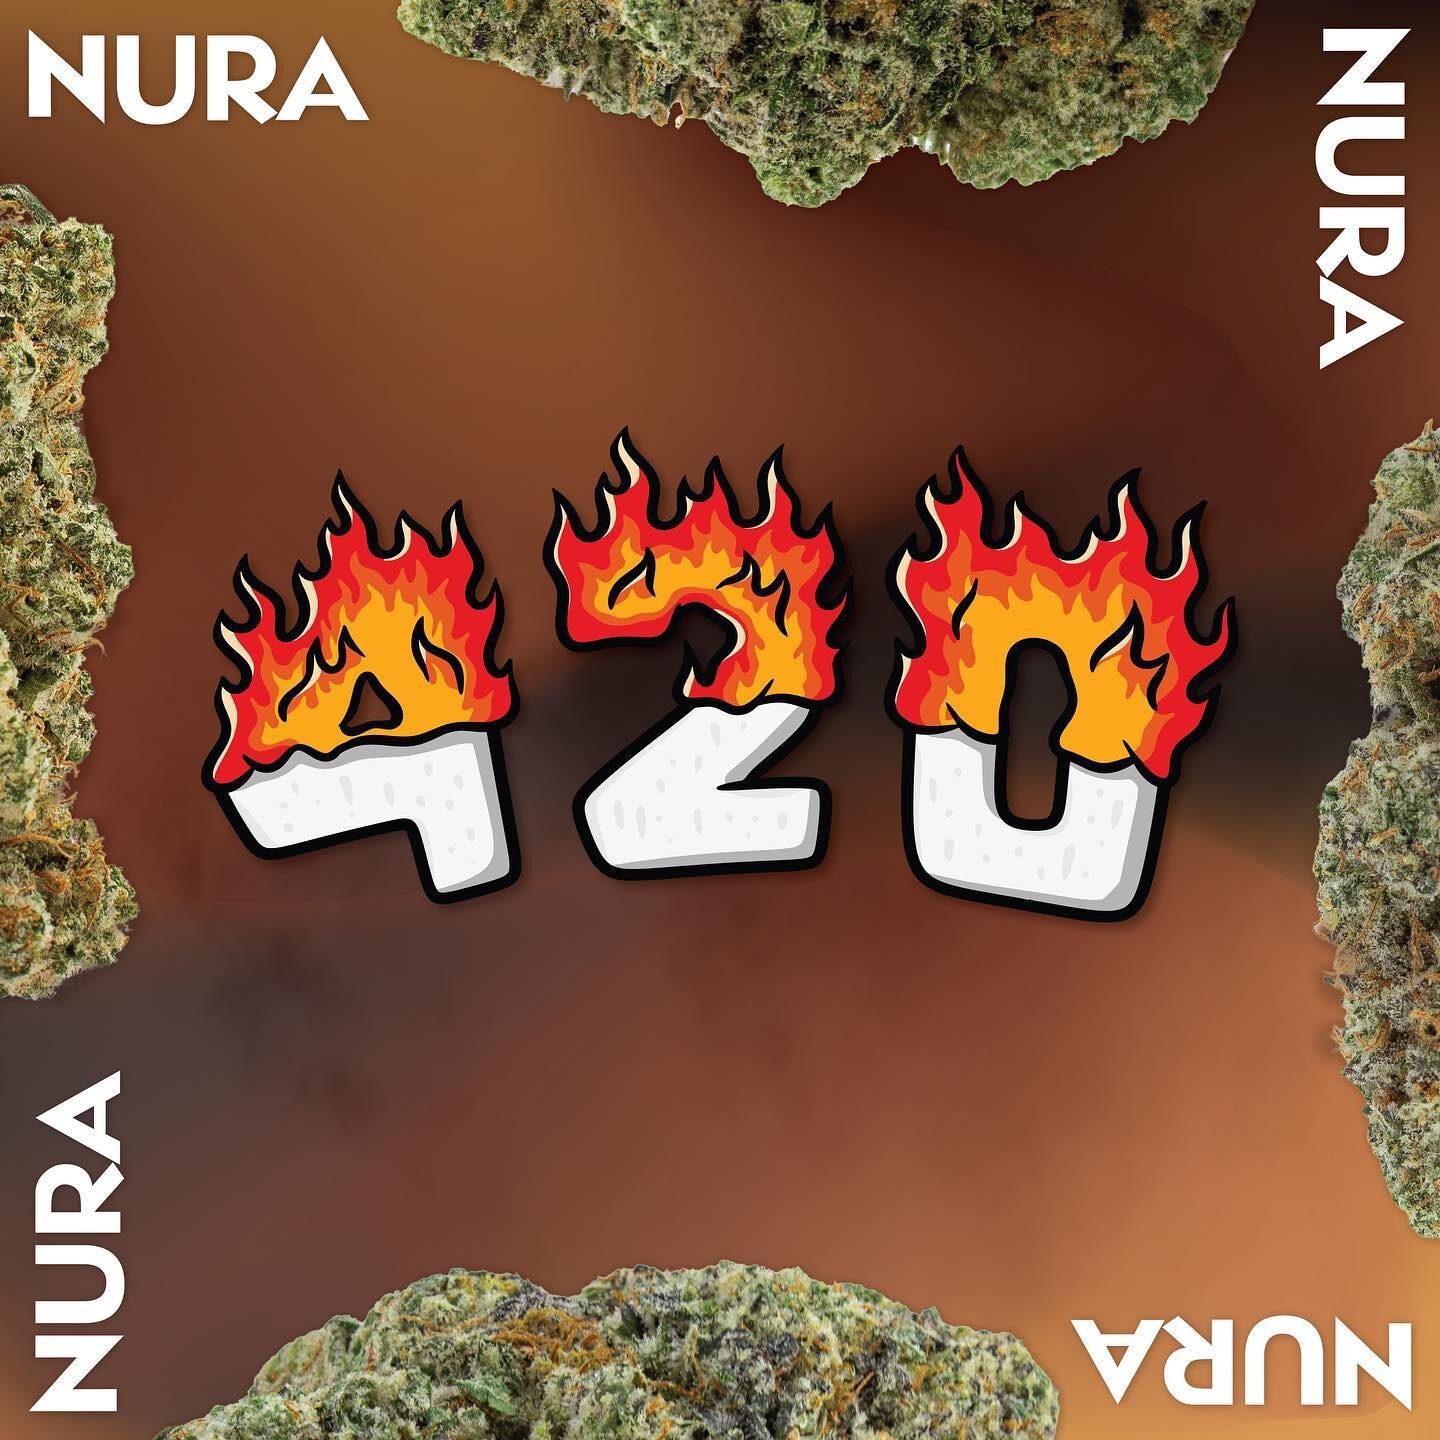 Happy 420 from the Nura team! Find your fire all across Michigan today 🔥

NOTHING FOR SALE &bull; EDUCATIONAL PURPOSES ONLY &bull; 21+